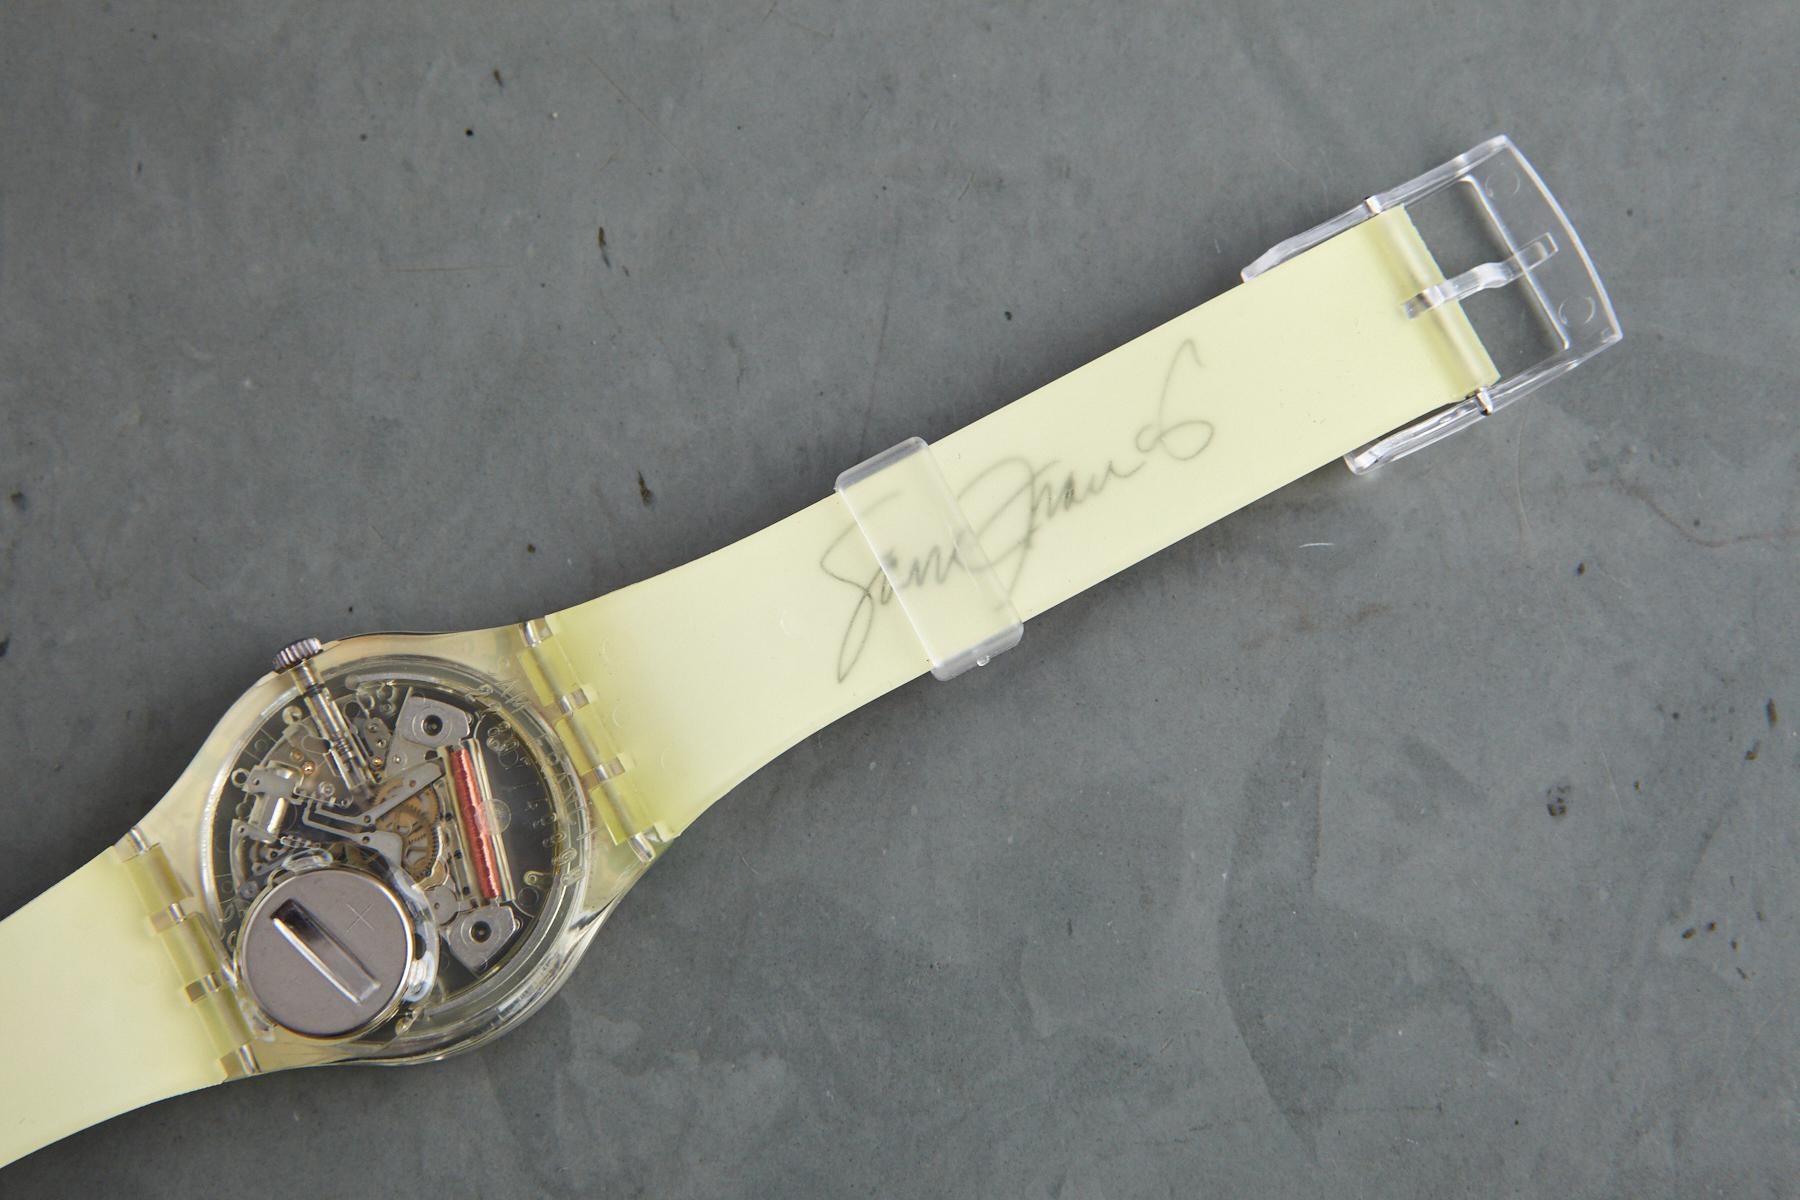 Late 20th Century Sam Francis Swatch Collectors Watch in Original Box, Never Worn, 1992